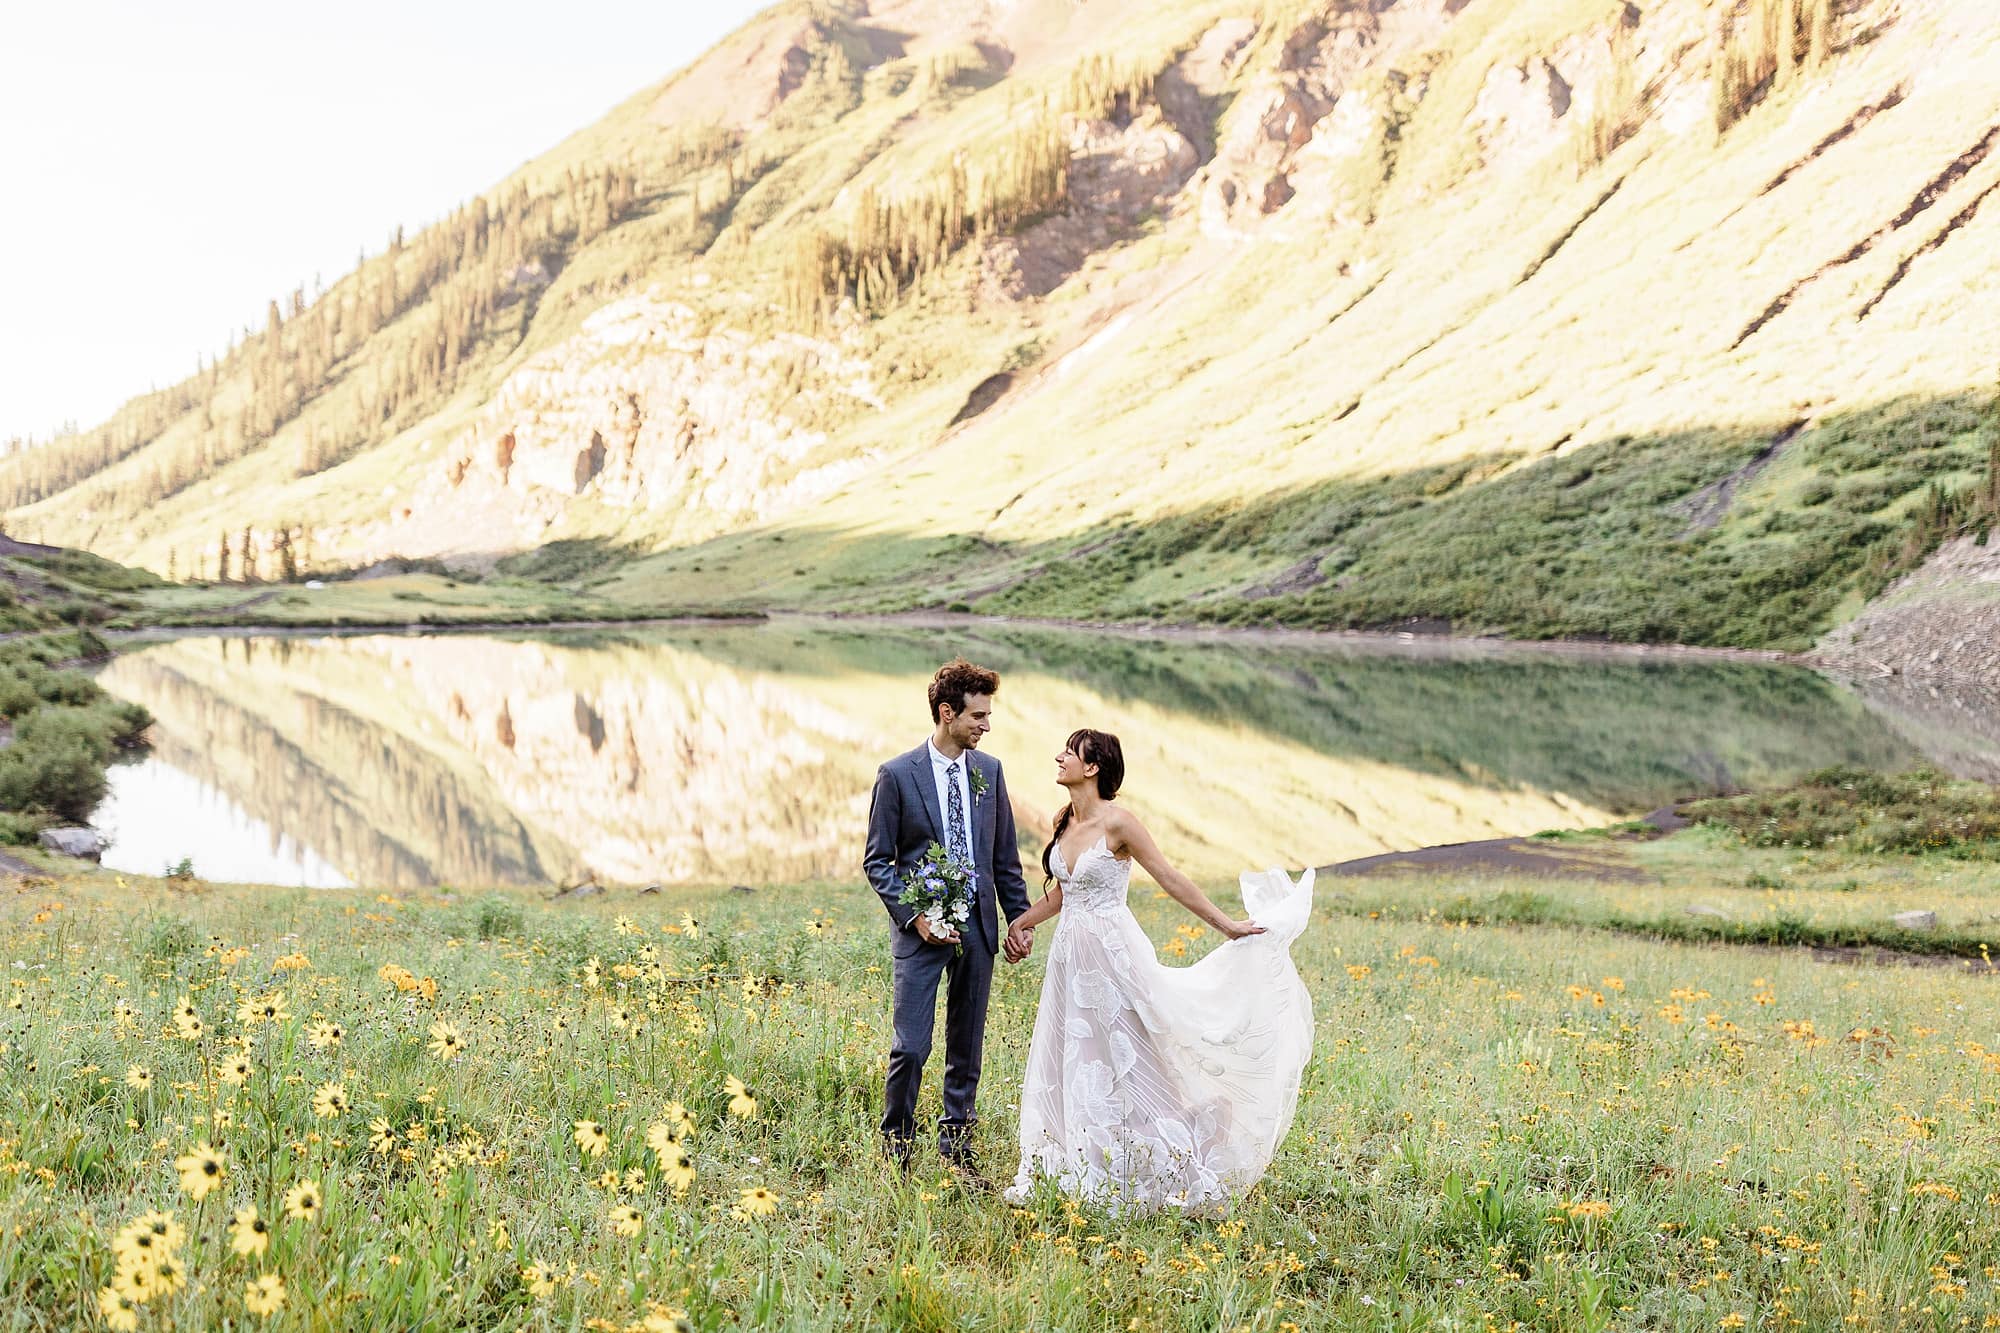 A couple that's just eloped stands in a field of wildflowers in Crested Butte